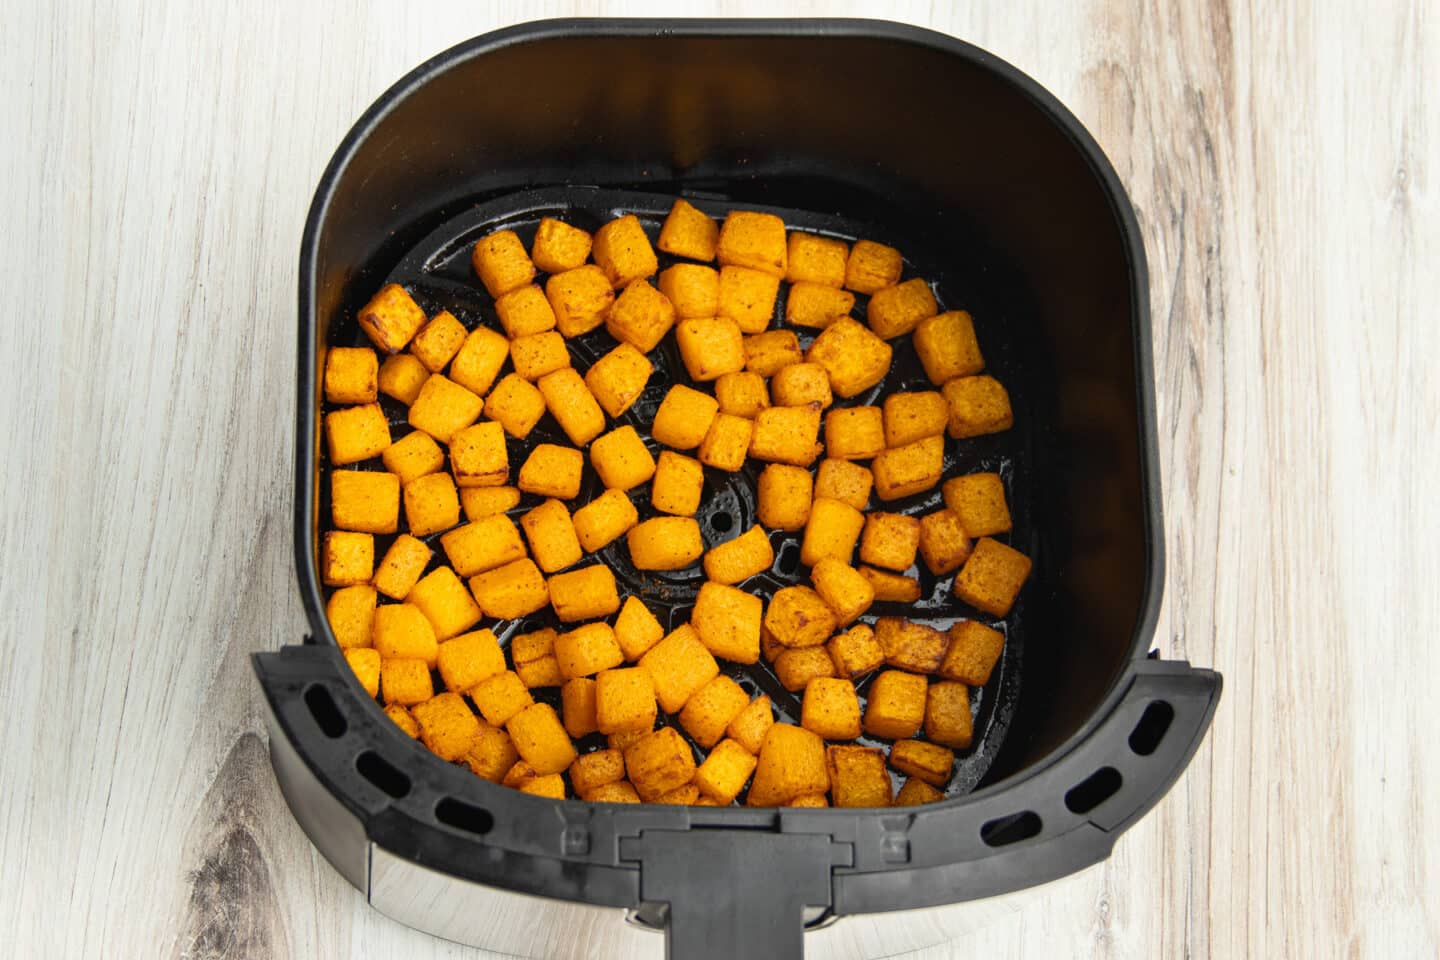 This is a picture of butternut squash in the air fryer after cooking.